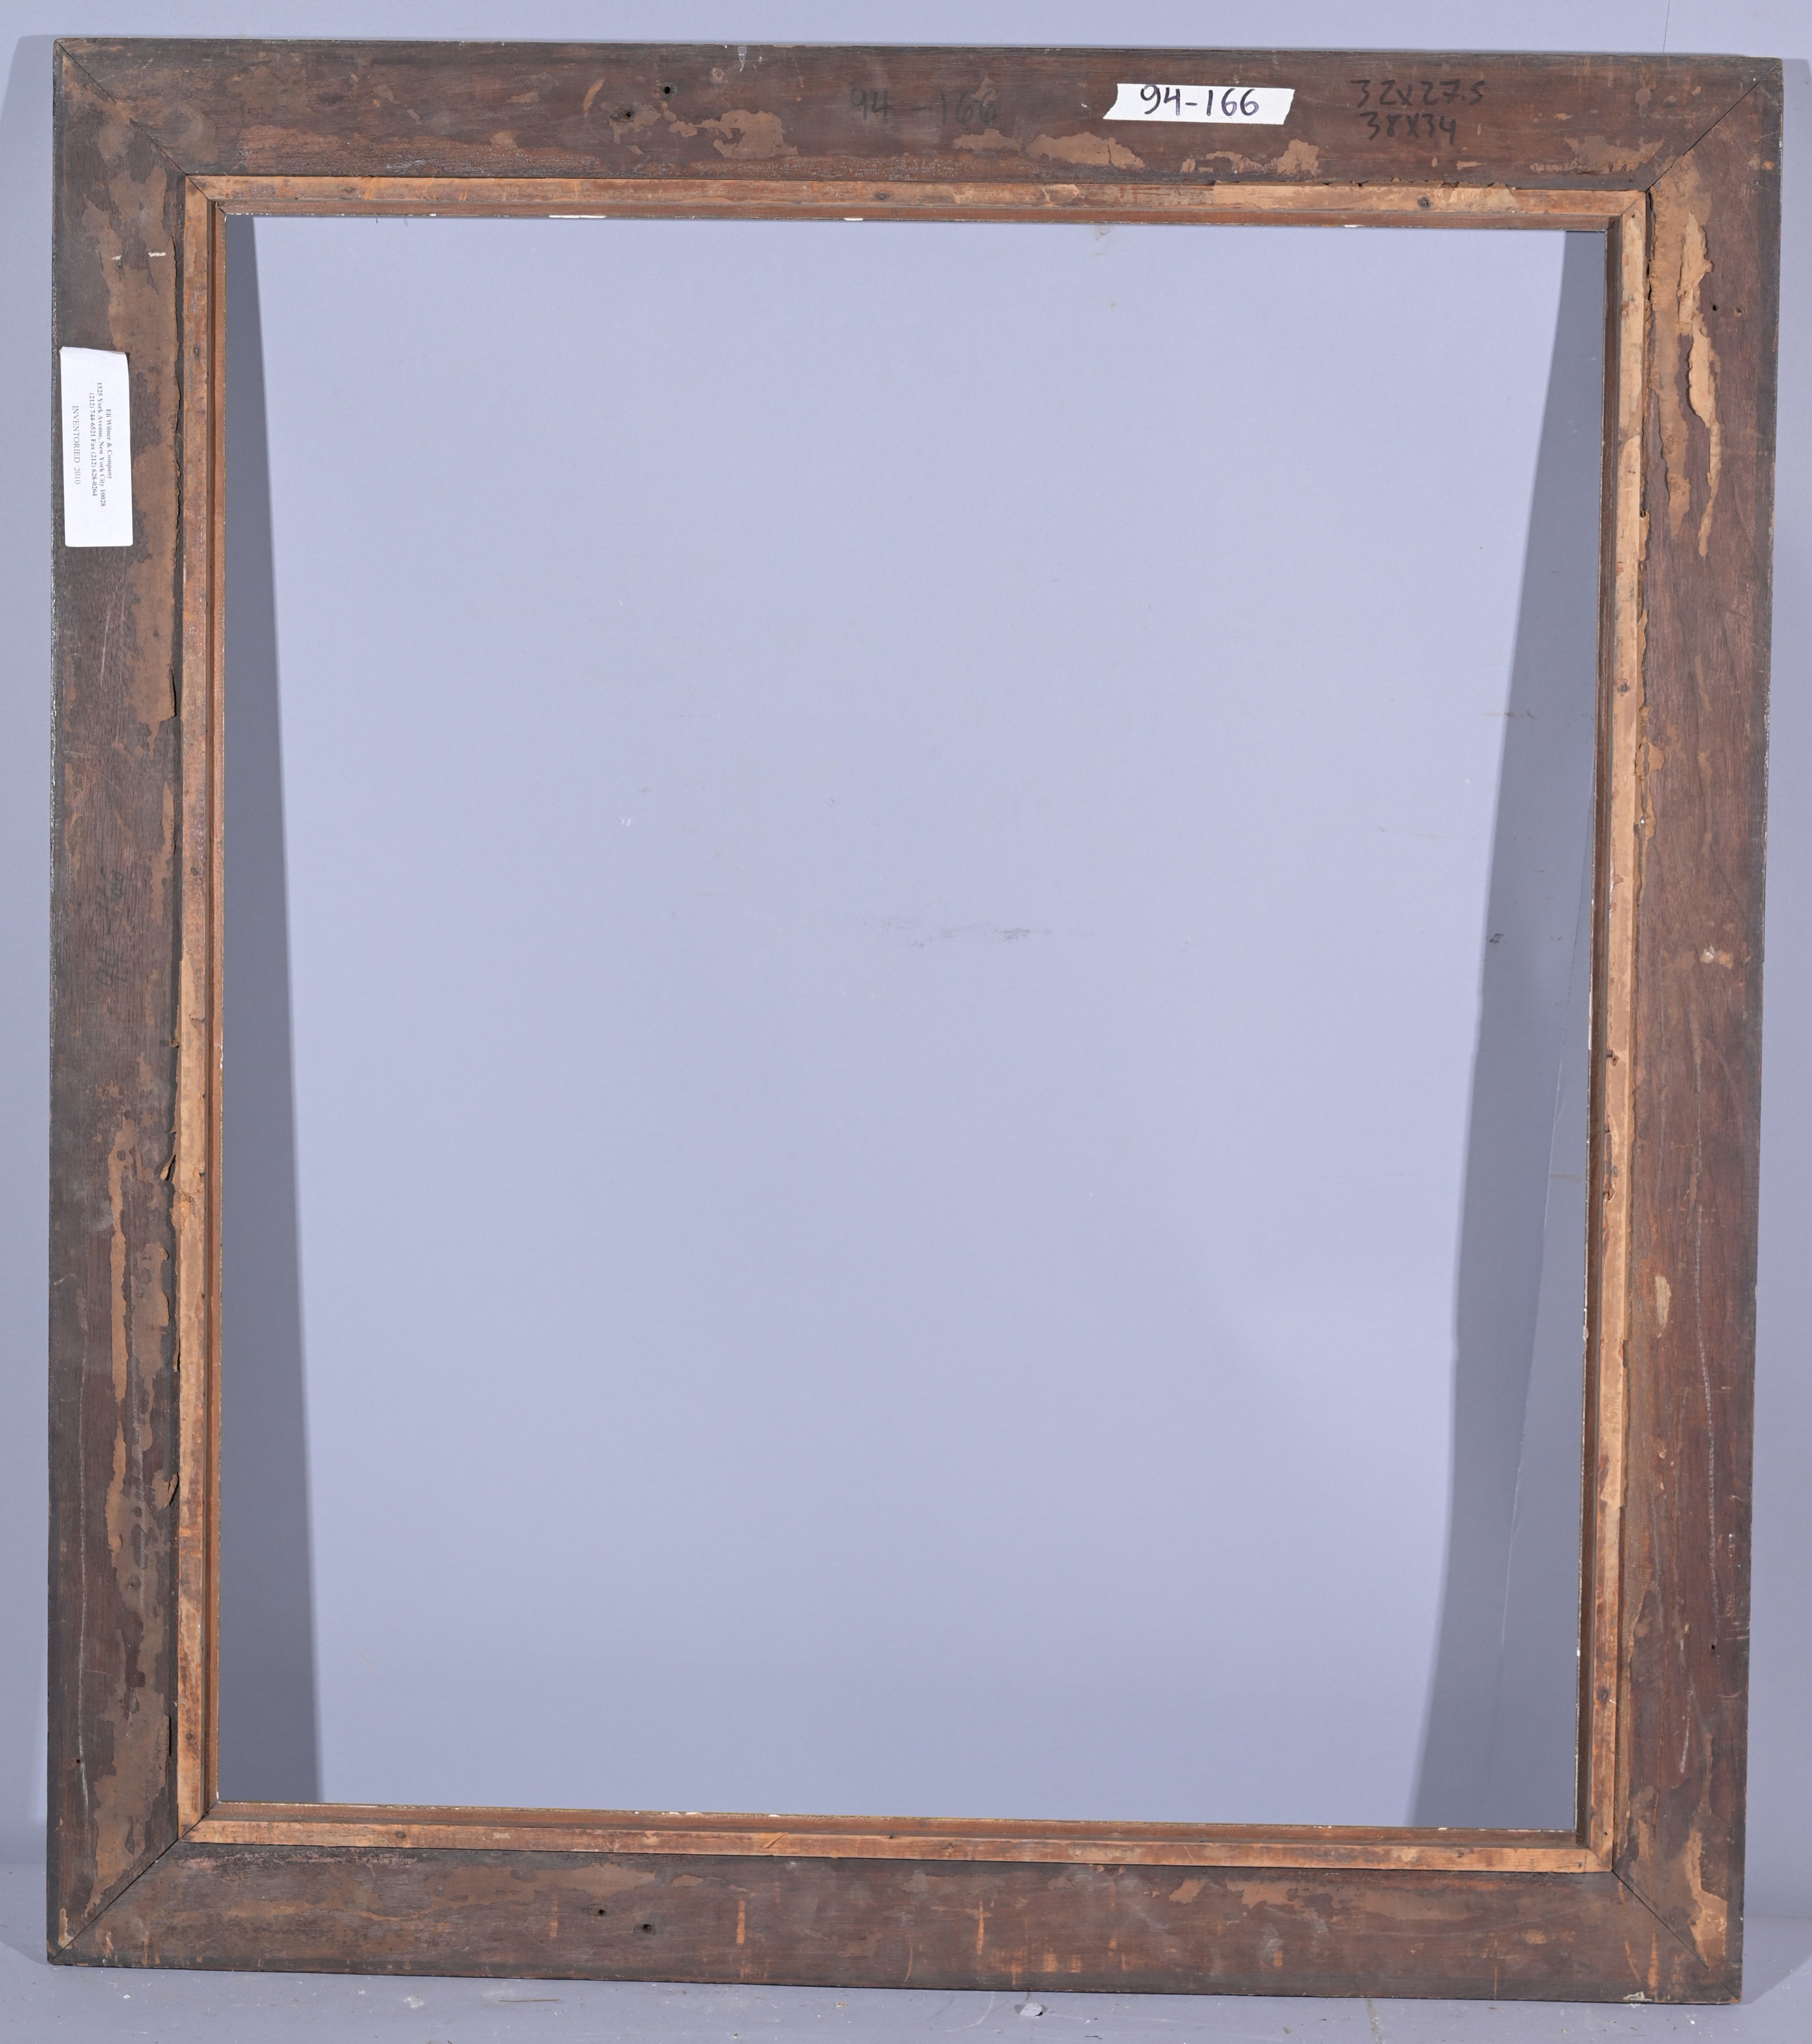 American 1870's Frame - 32 x 27.5 - Image 6 of 6